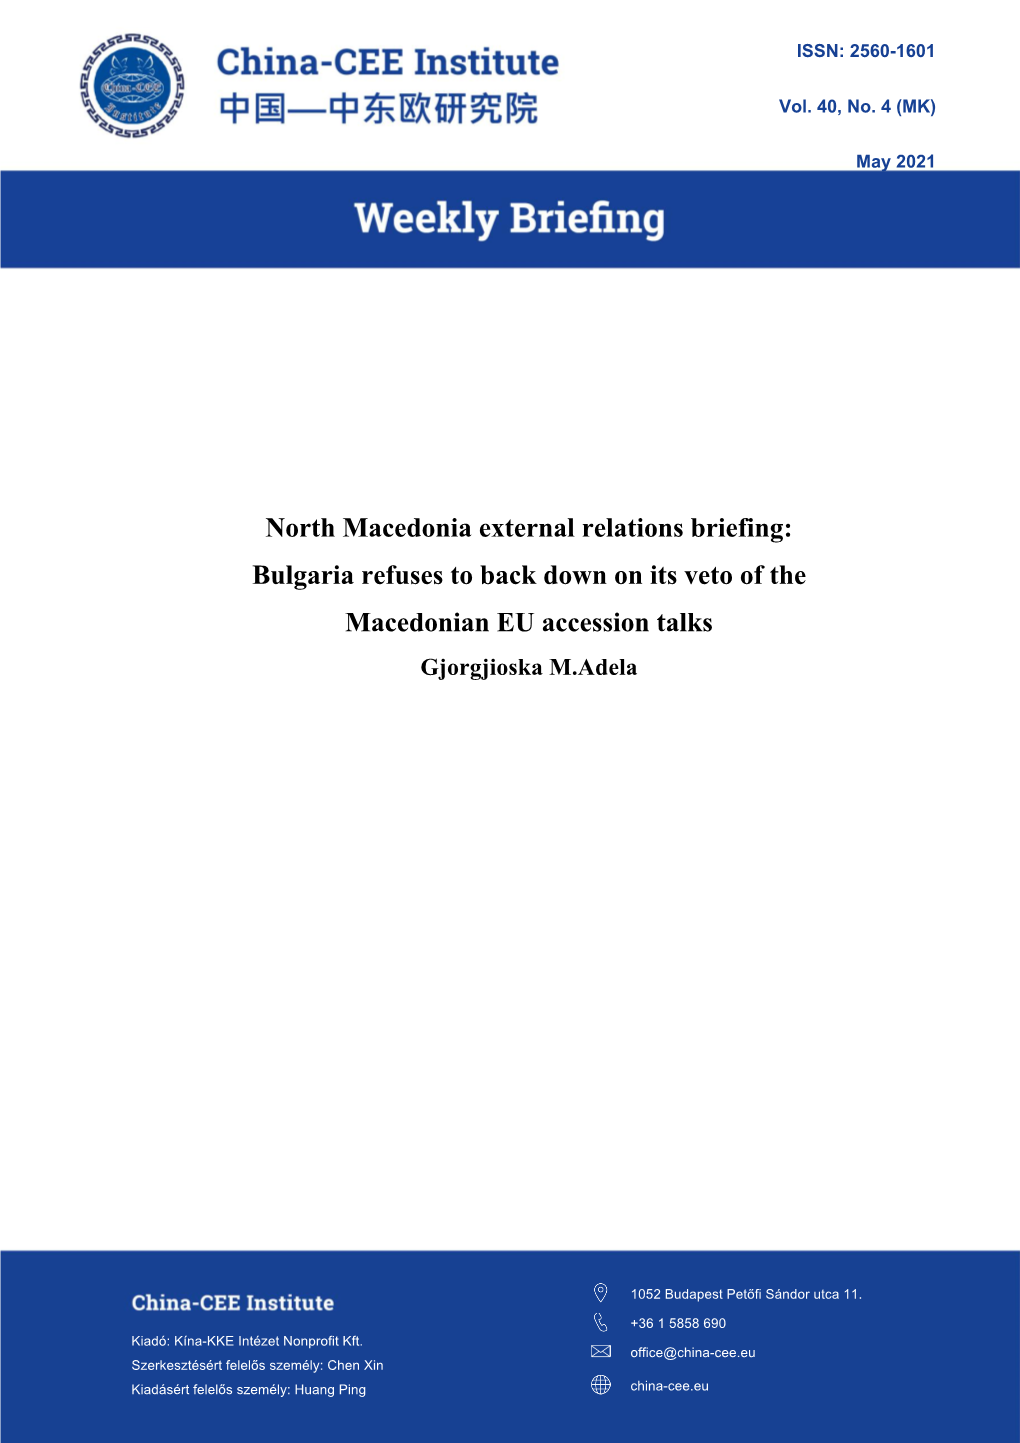 North Macedonia External Relations Briefing: Bulgaria Refuses to Back Down on Its Veto of the Macedonian EU Accession Talks Gjorgjioska M.Adela